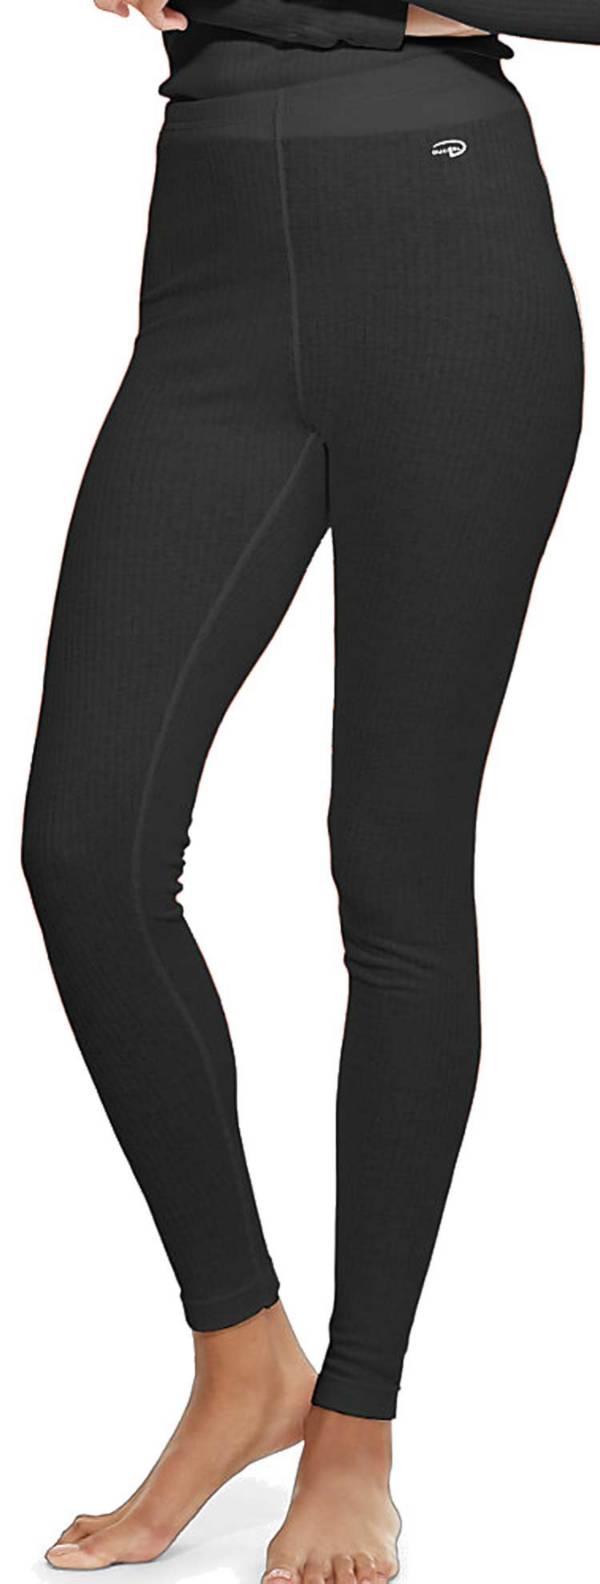 Duofold Womens Varitherm Performance Base Layer Thermal Leggings S